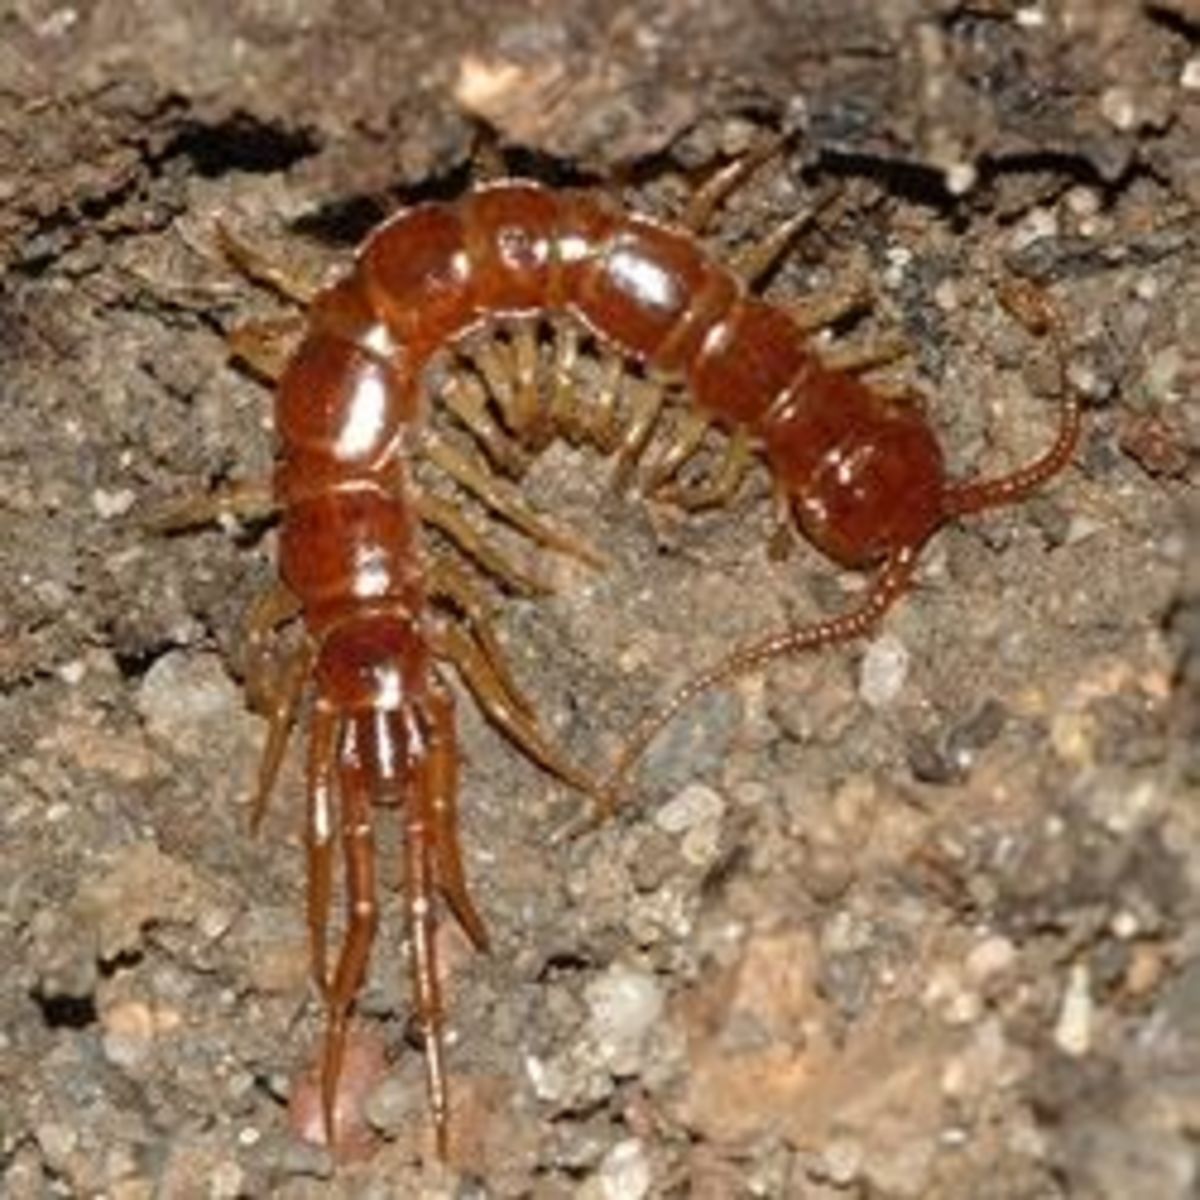 Centipedes – an ally in our battle against garden pests